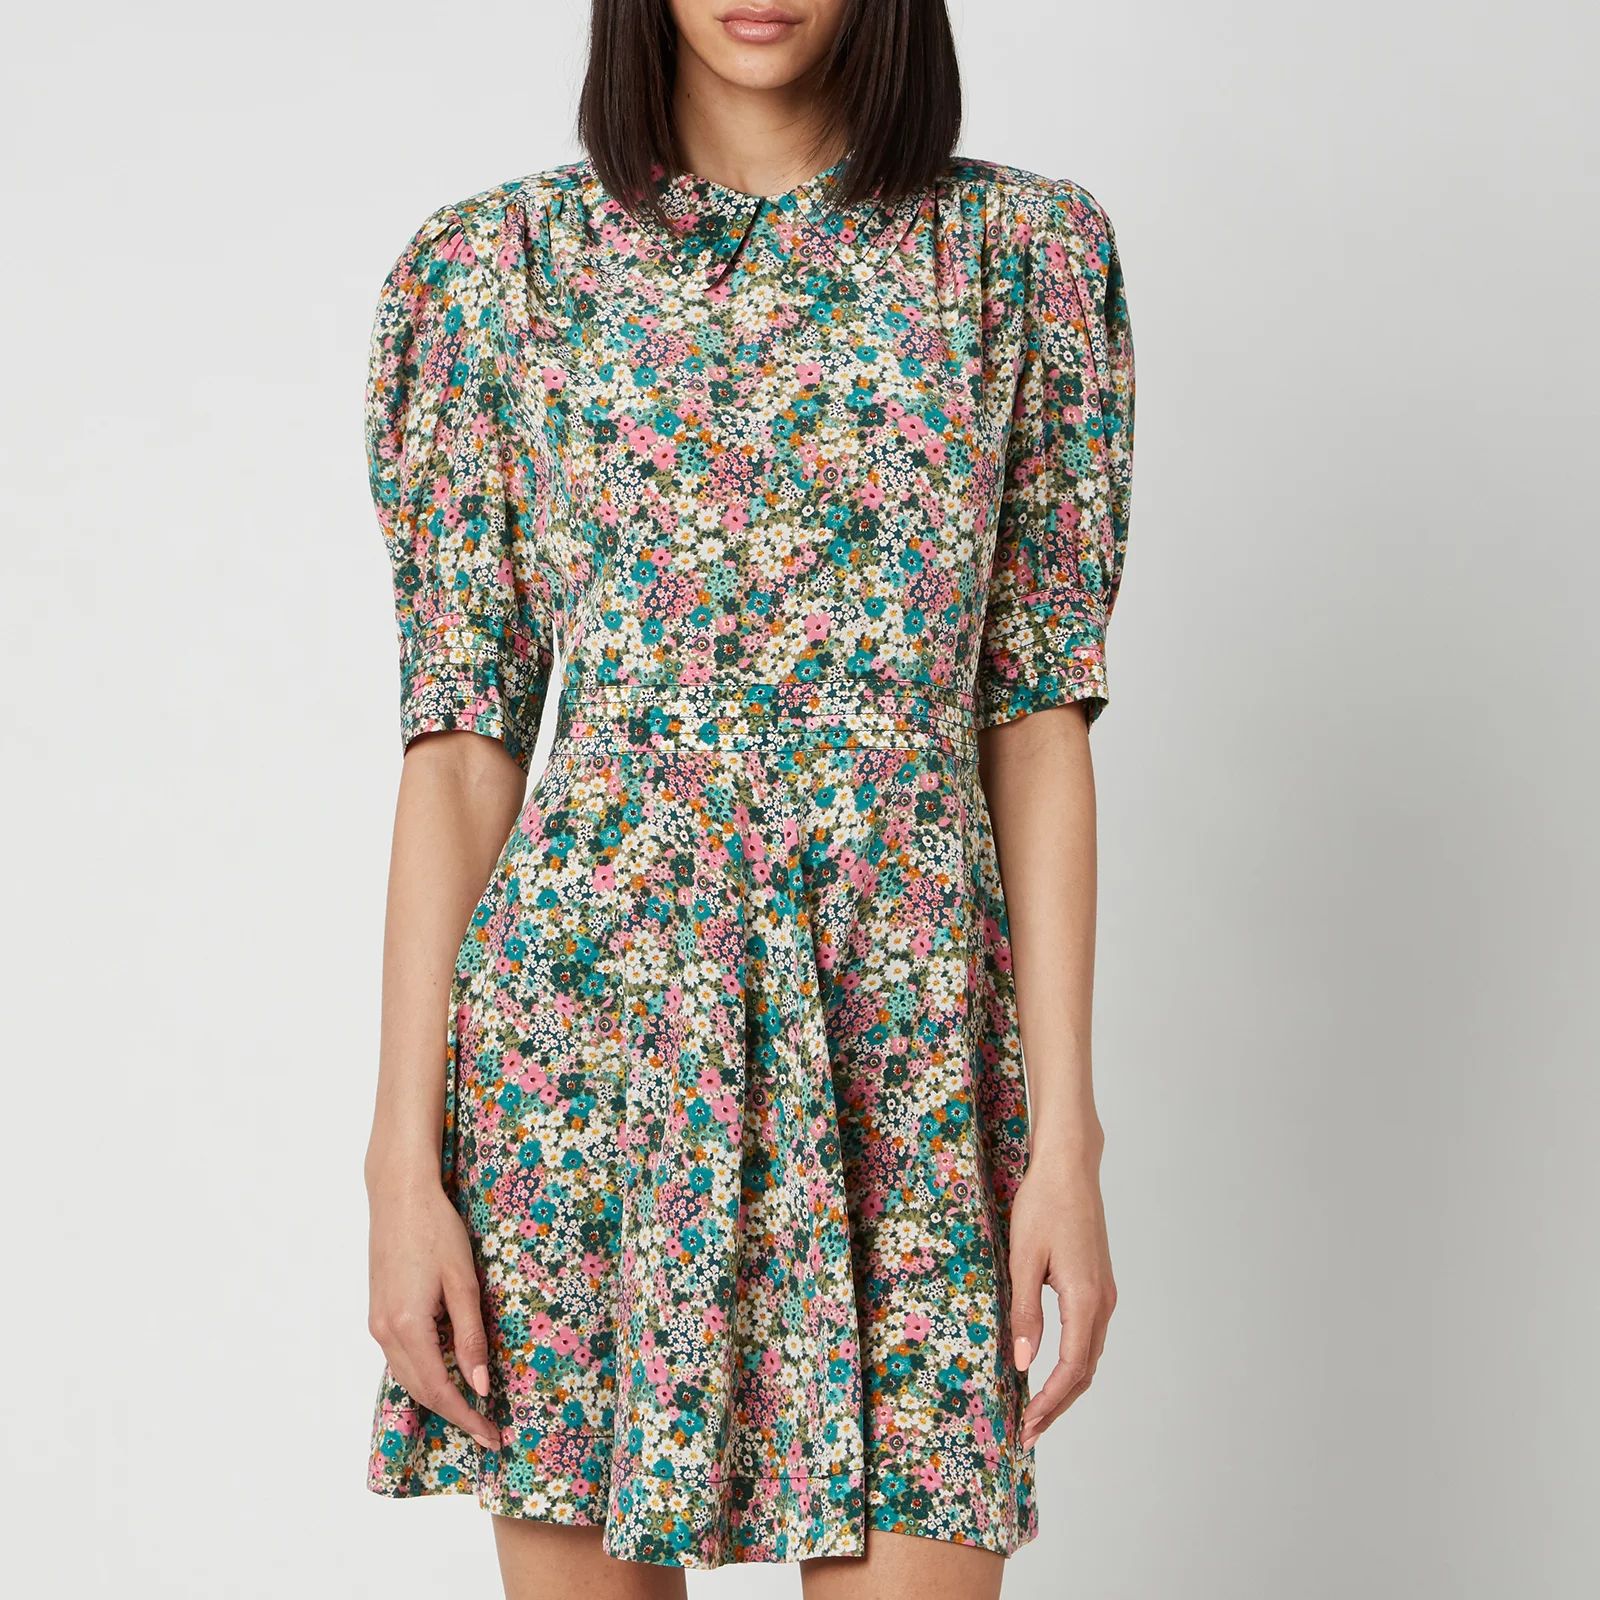 See By Chloé Women's Short Puff Sleeve Floral Dress - Multi Image 1